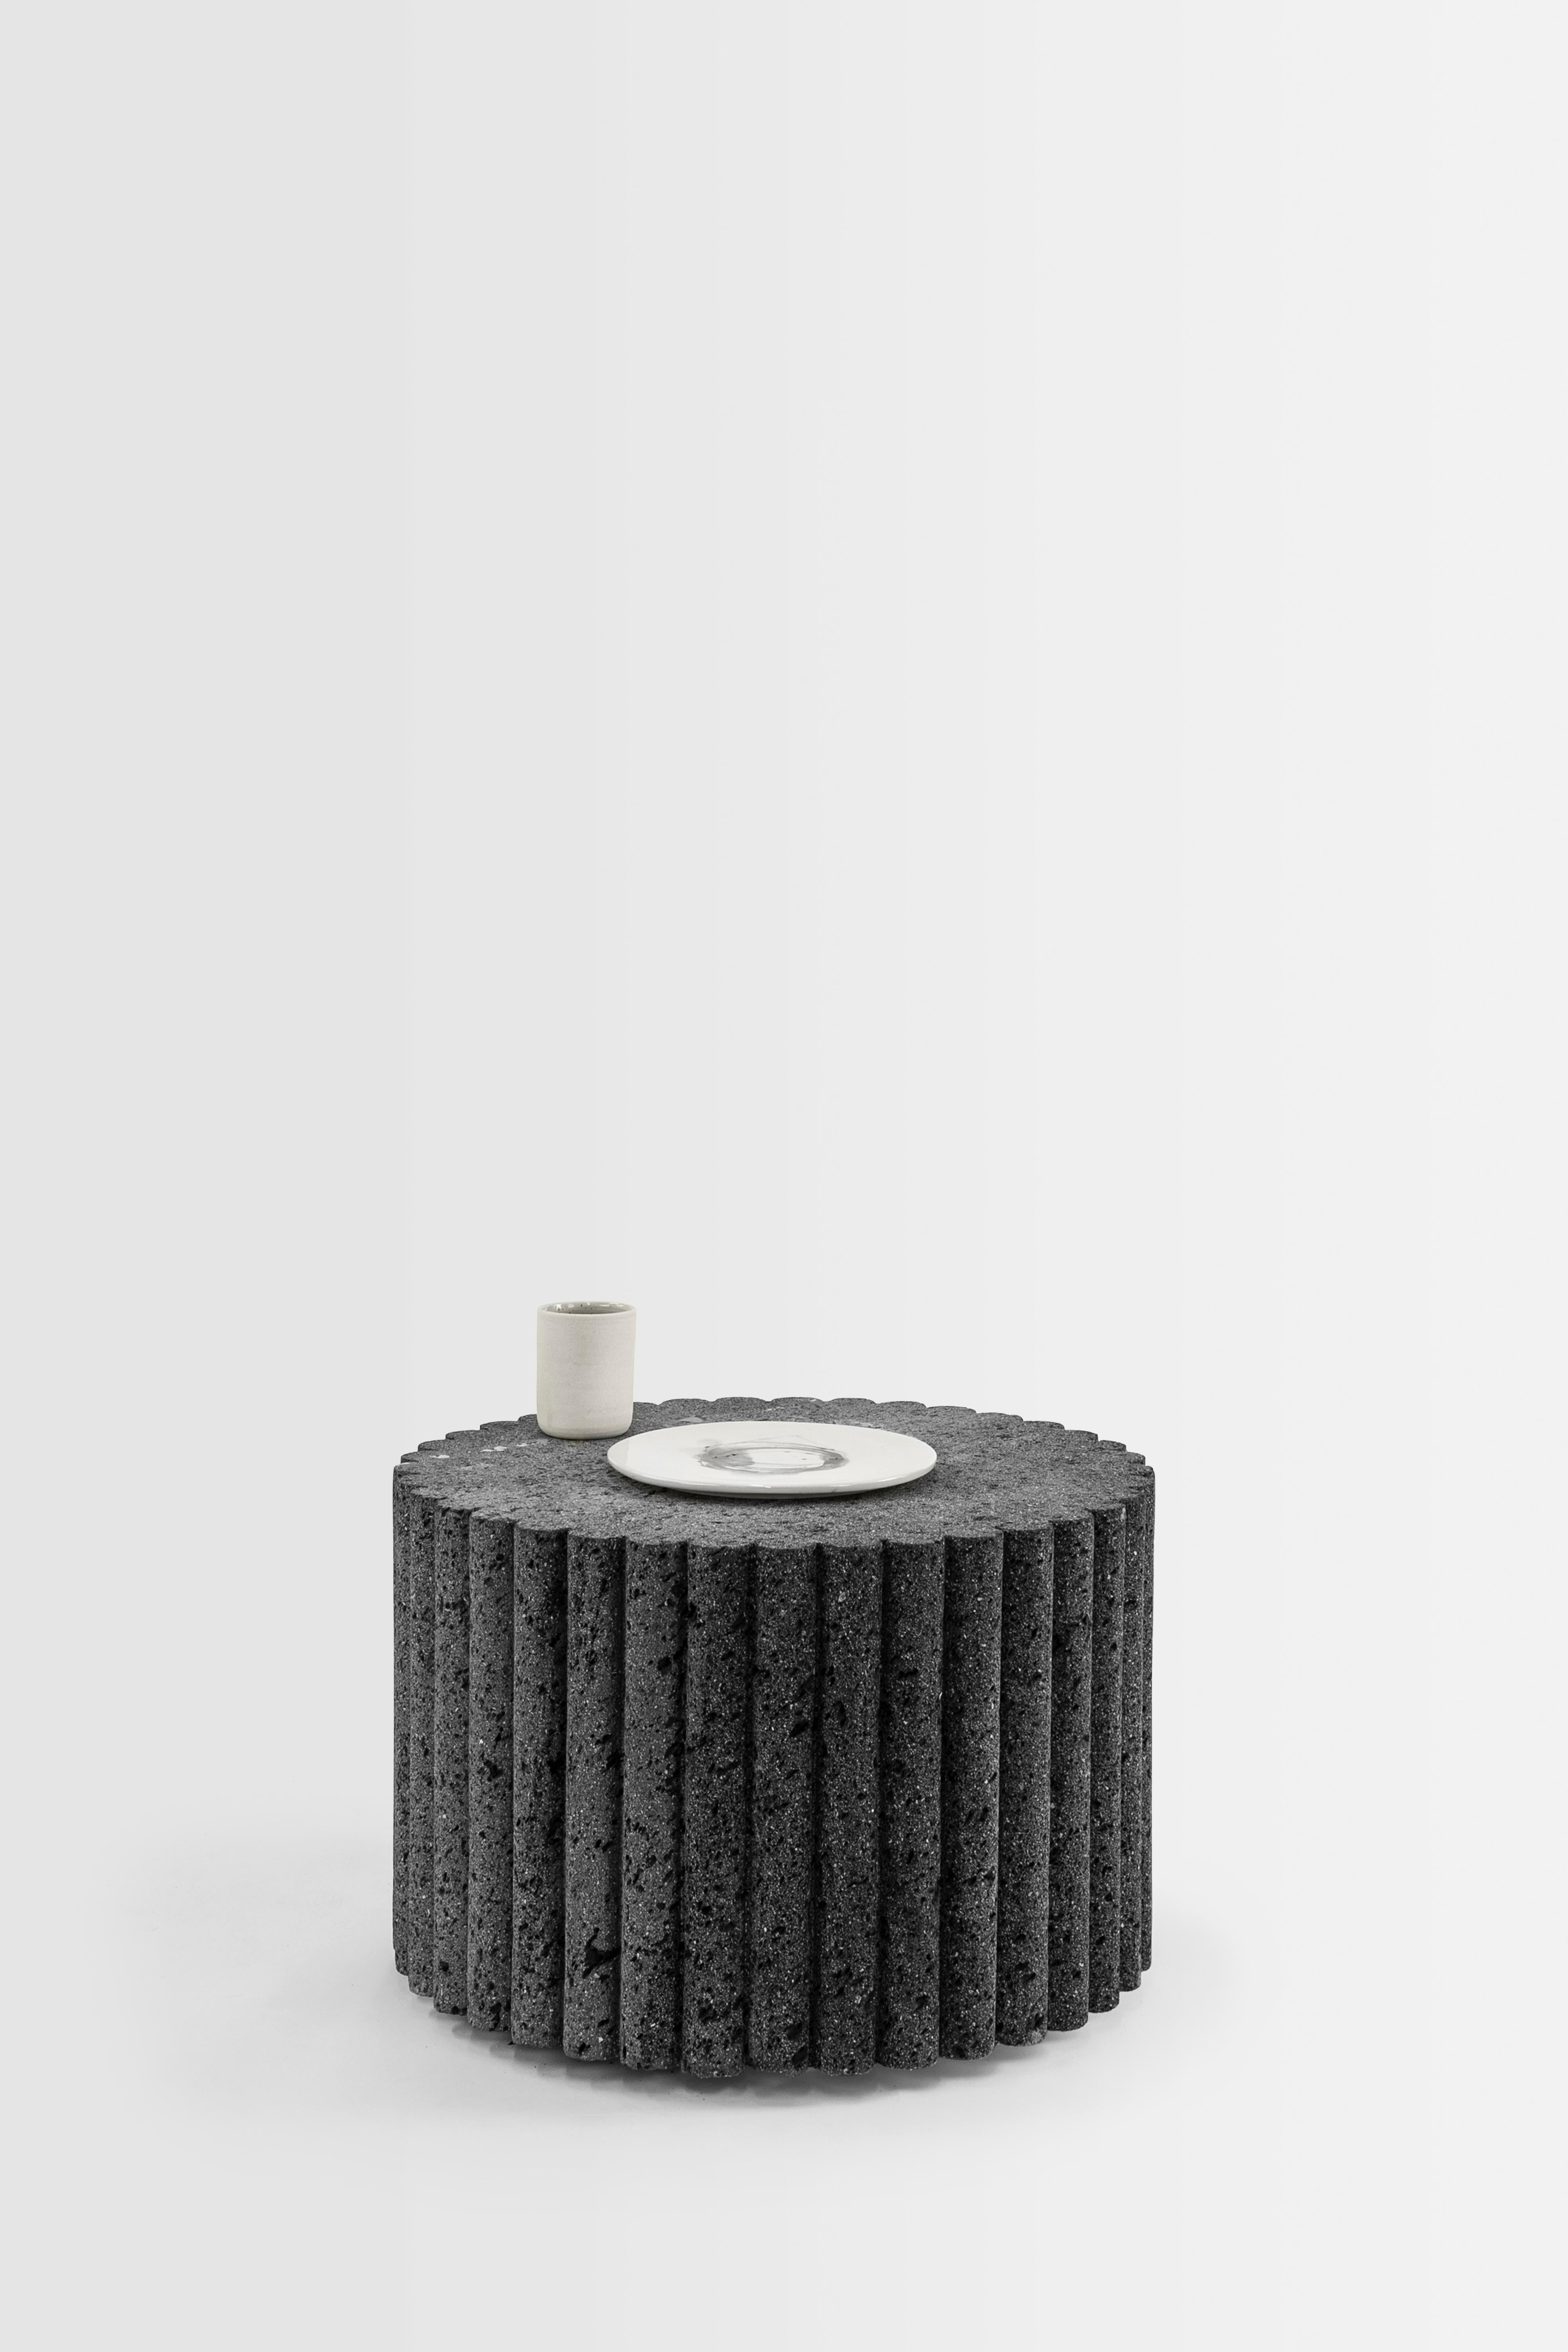 LOTO ROCA coffee table is exploration personified. This volcanic stone monolith has been carved mastering a meditative process with chisel and hammer. A coffee table recalling the esthetic character of the LOTO ROCA family: a meeting point in social